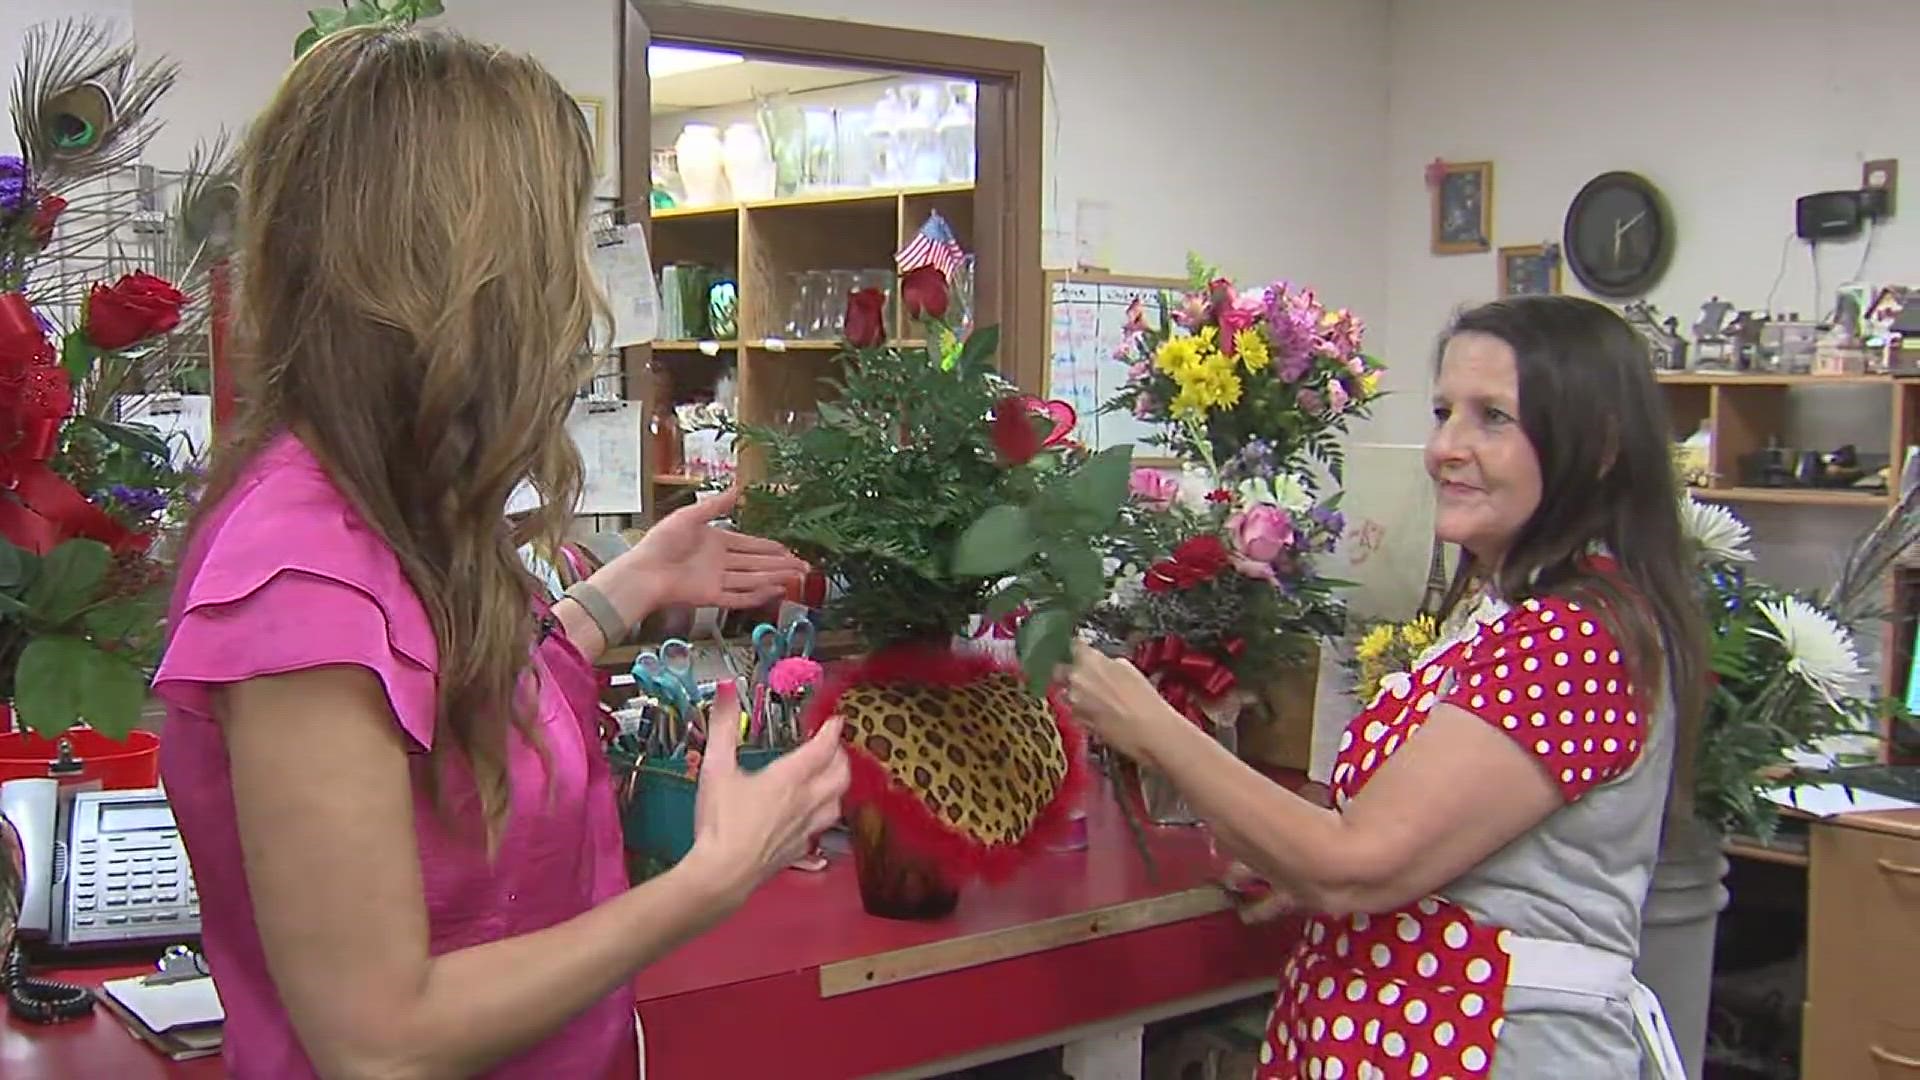 Valentine's Day is next week and Tracy is in Vidor getting tips on the perfect Valentine's floral display.